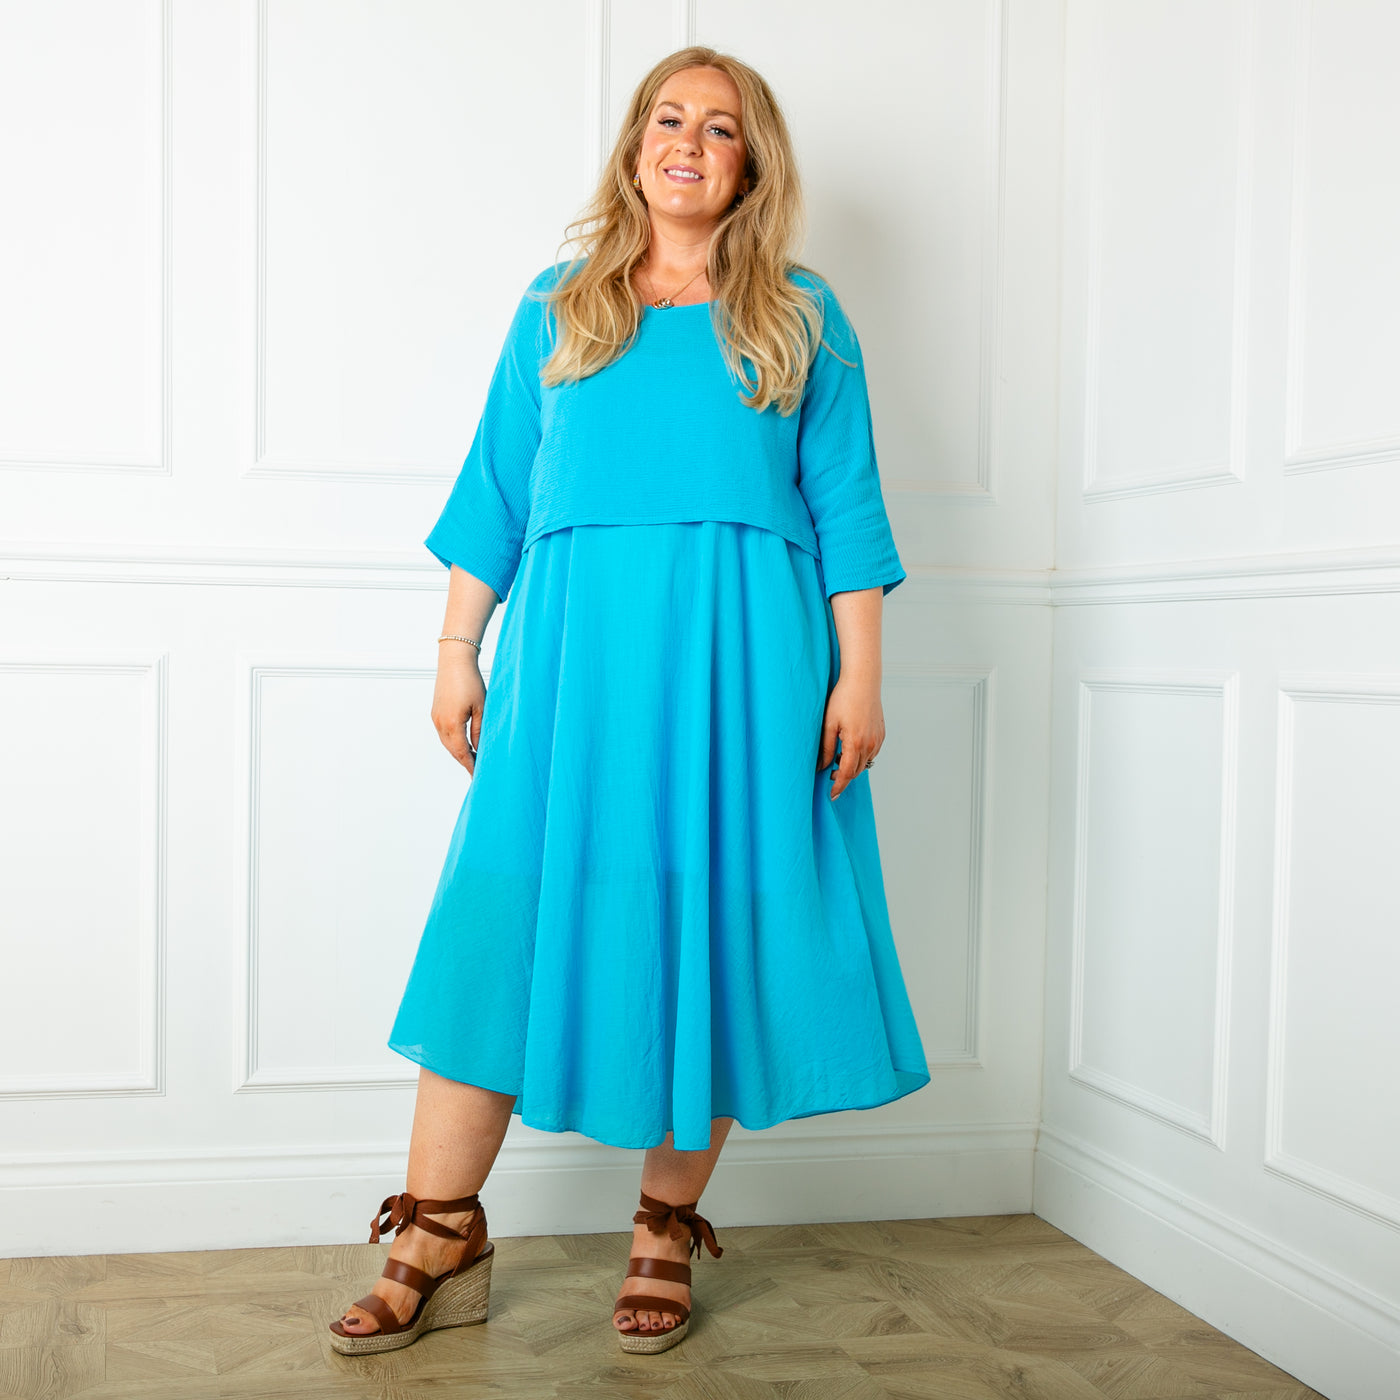 The Aqua Blue Two Piece Dress which can be worn with the top and dress together as a set or as separate pieces